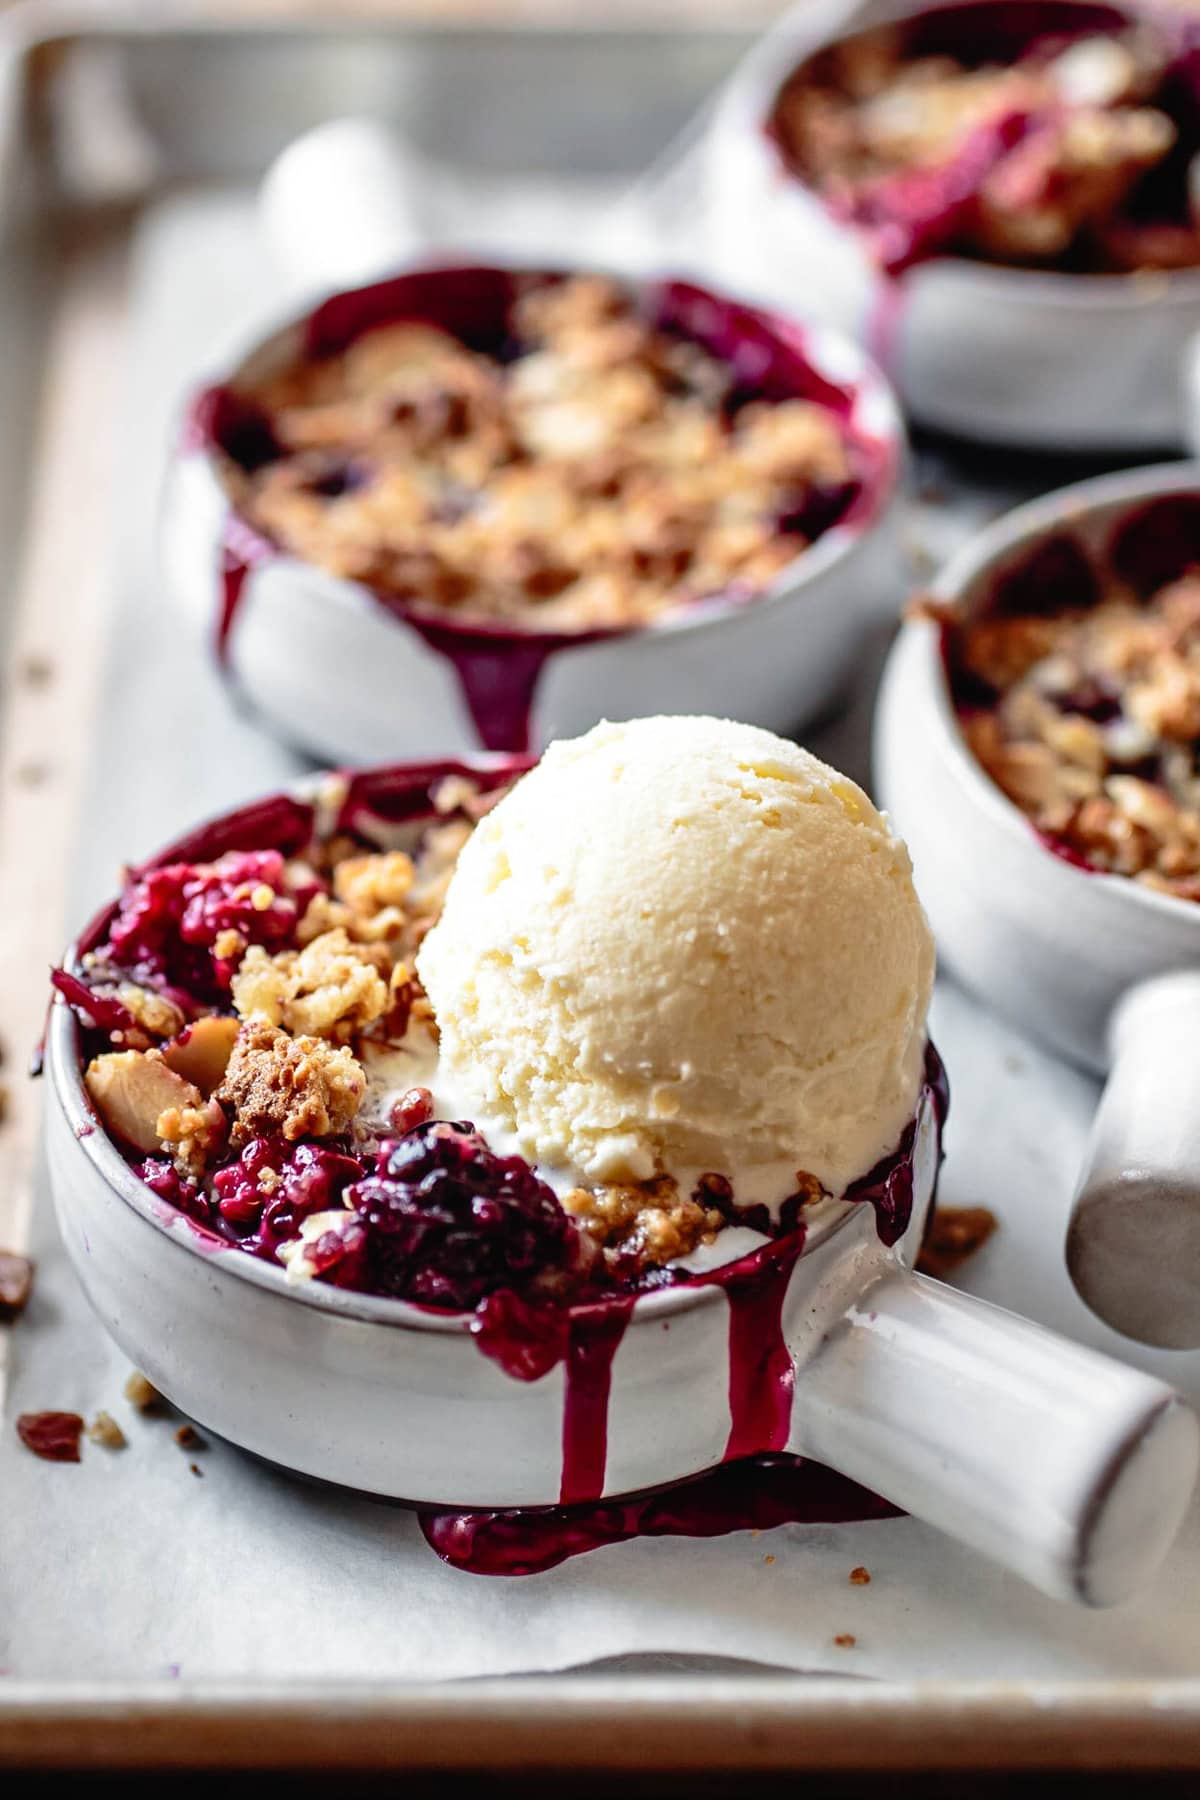 A scoop of creme fraiche ice cream melts over a pan of berry crisp